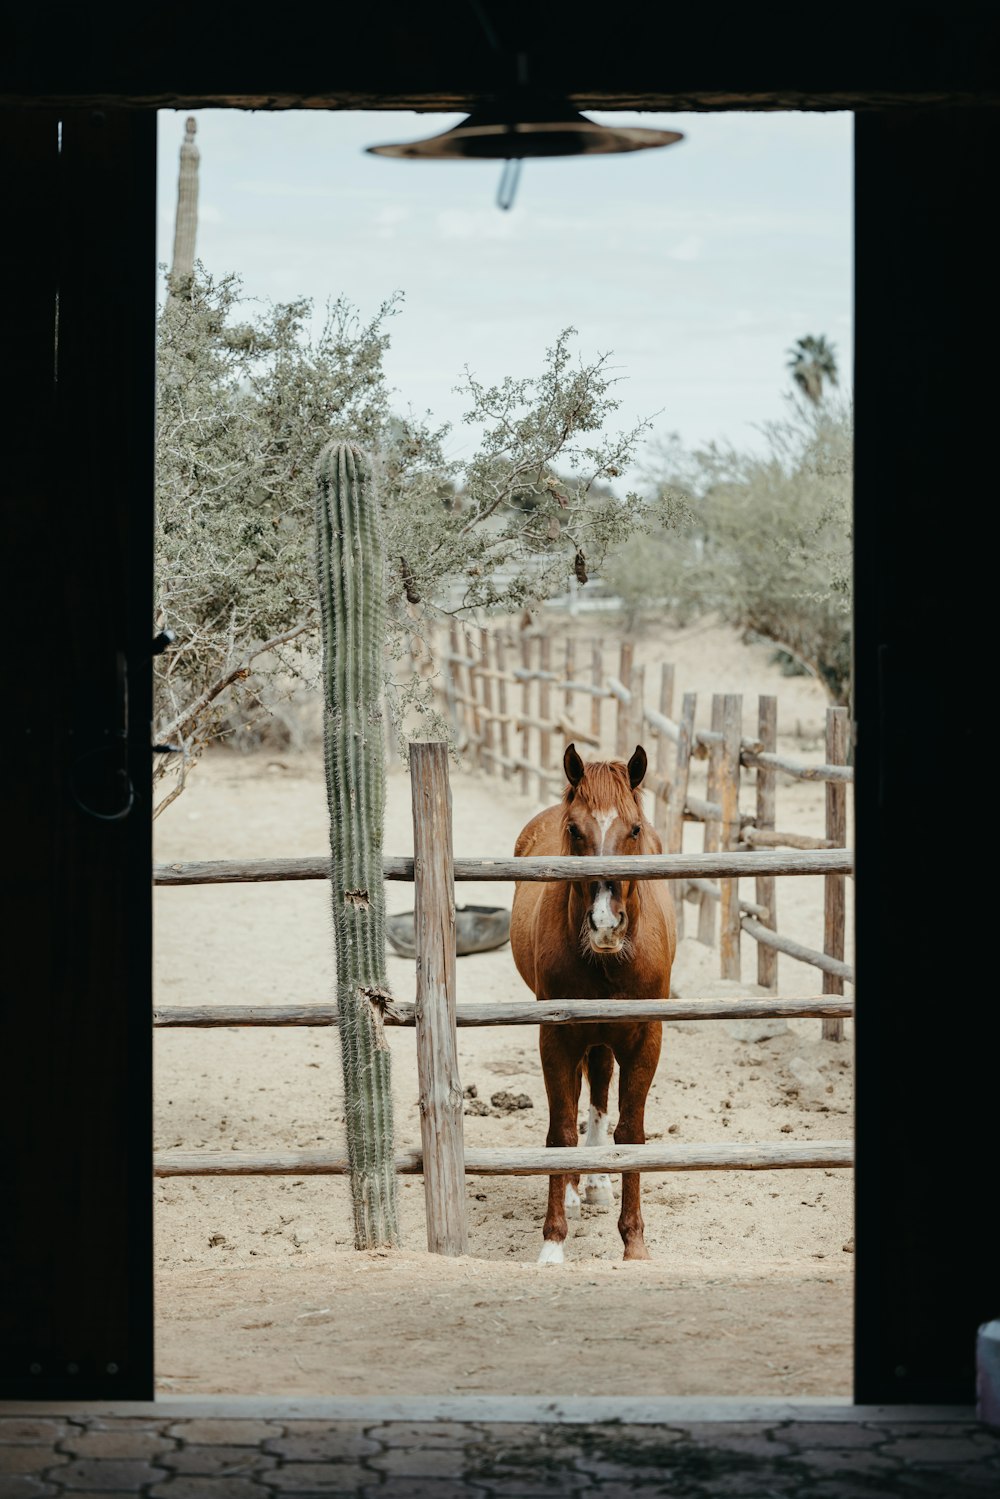 a brown horse standing next to a wooden fence